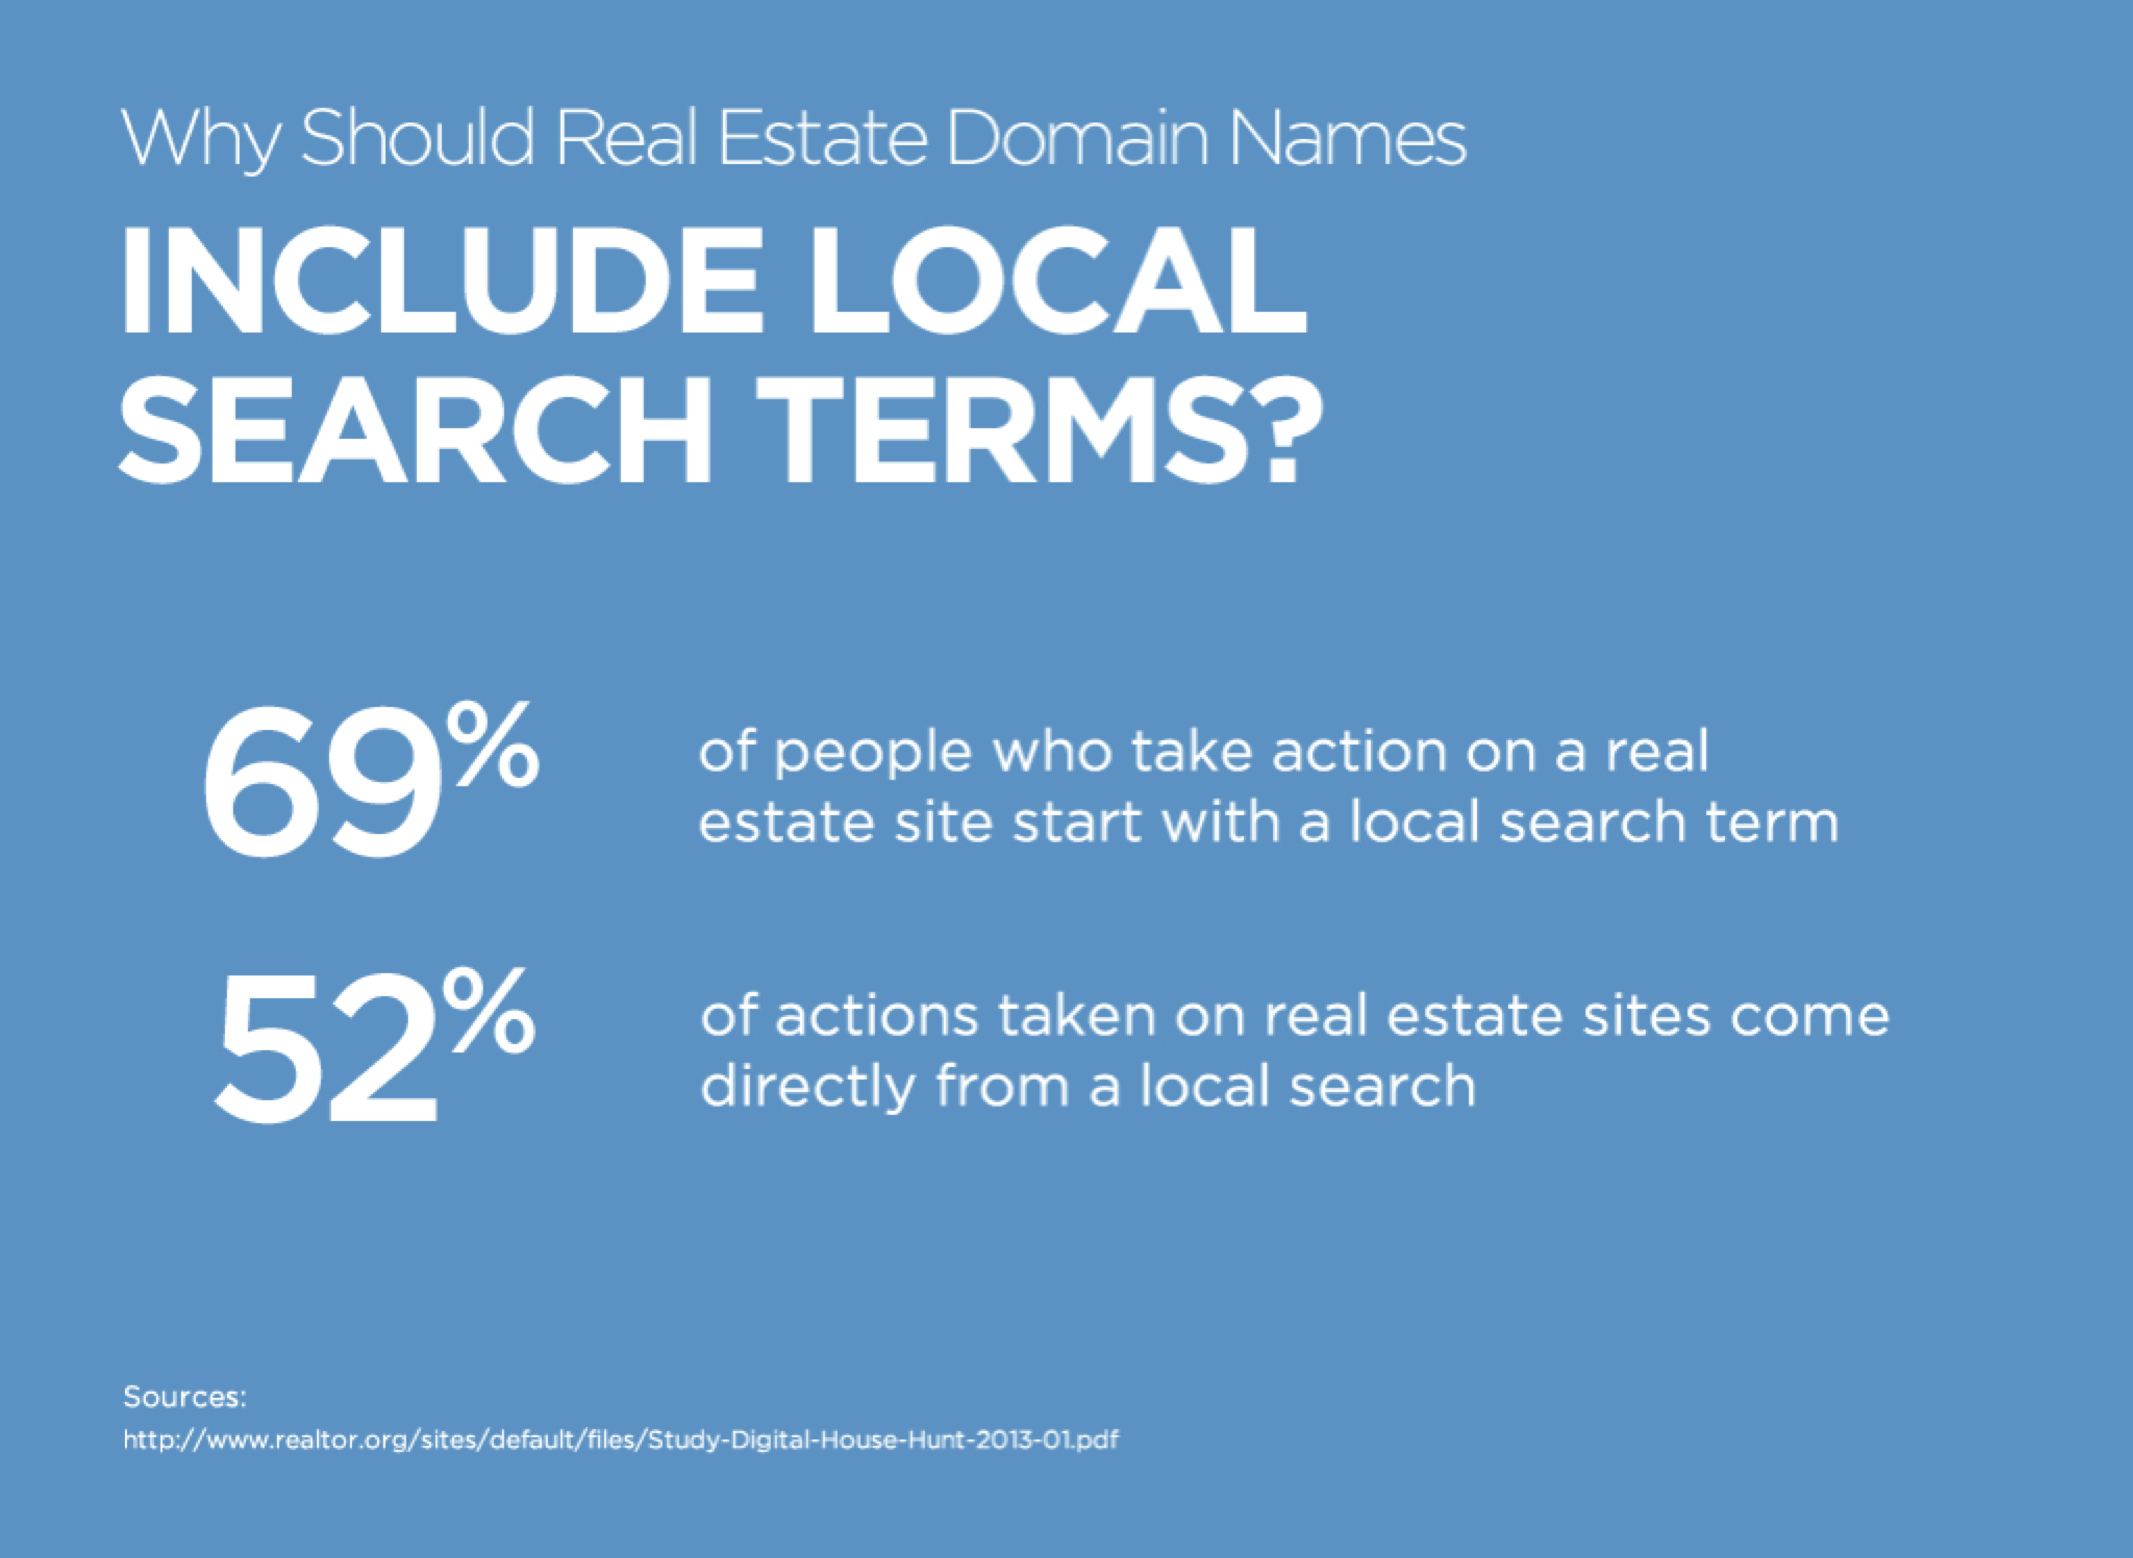 local search terms attract digital home shoppers to your content